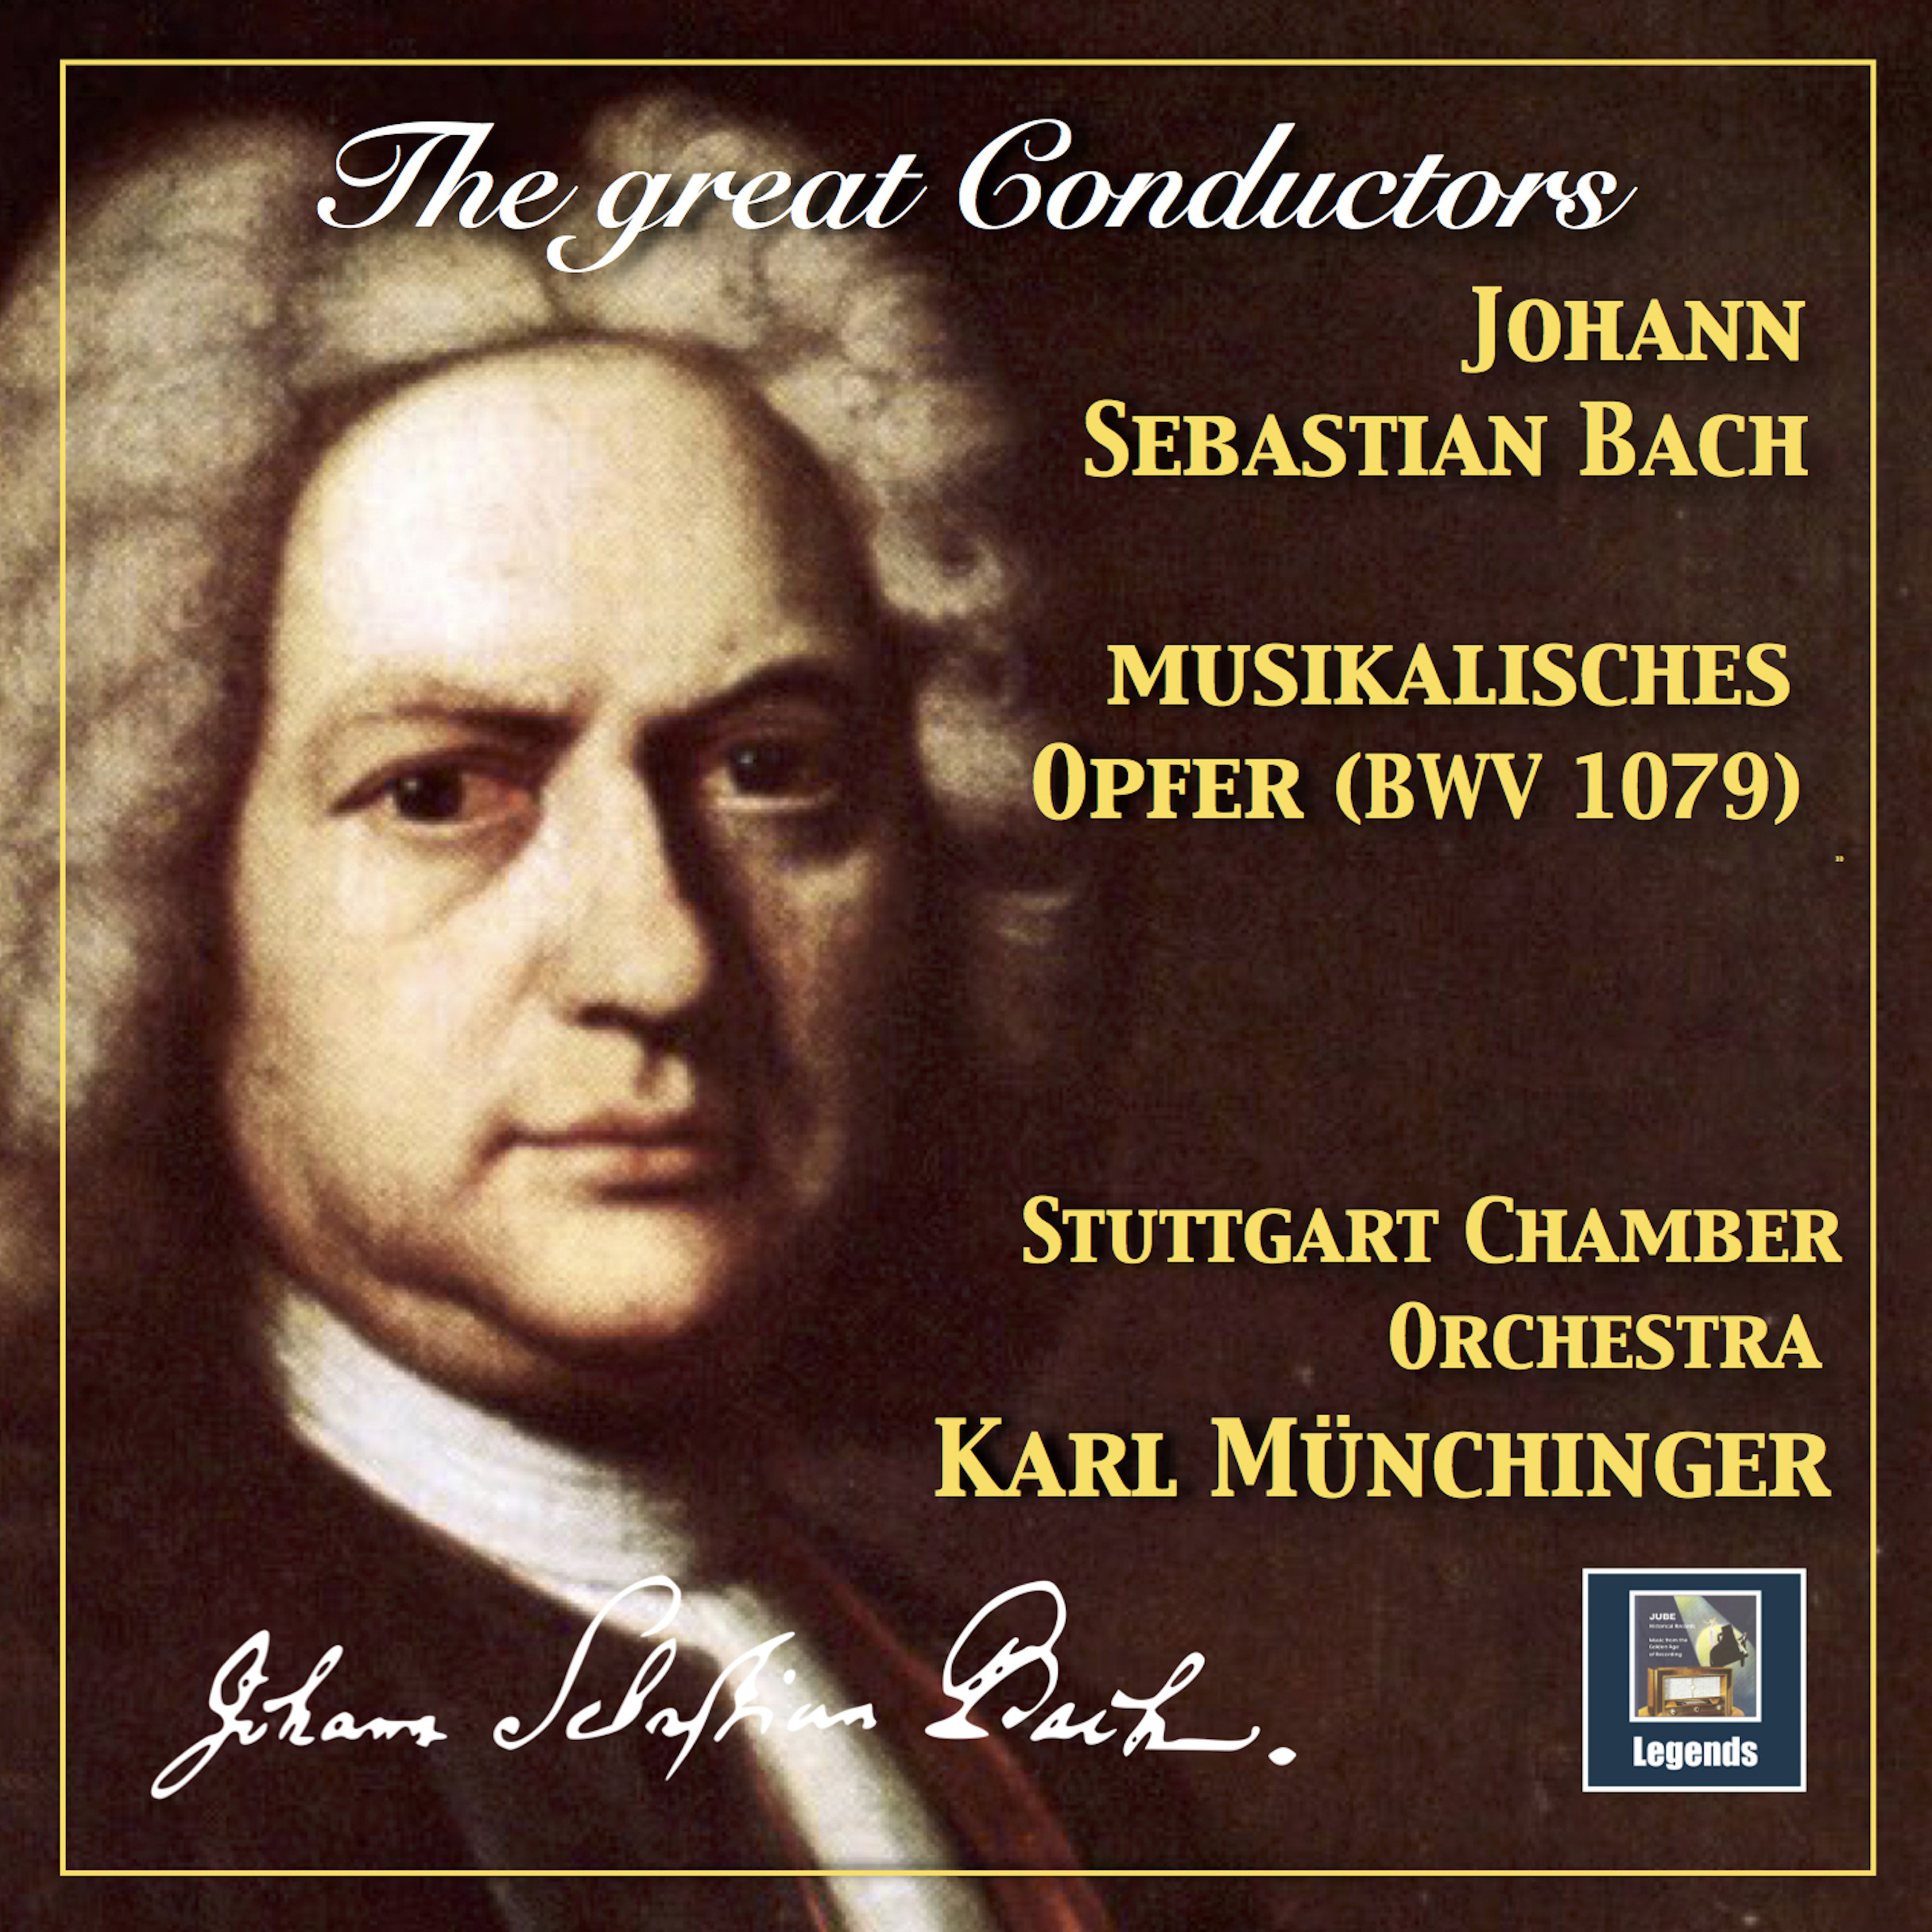 The Great Conductors: Karl Mü nchinger Conducts Bach  Musikalisches Opfer, BWV 1079 Arr. for Chamber Orchestra